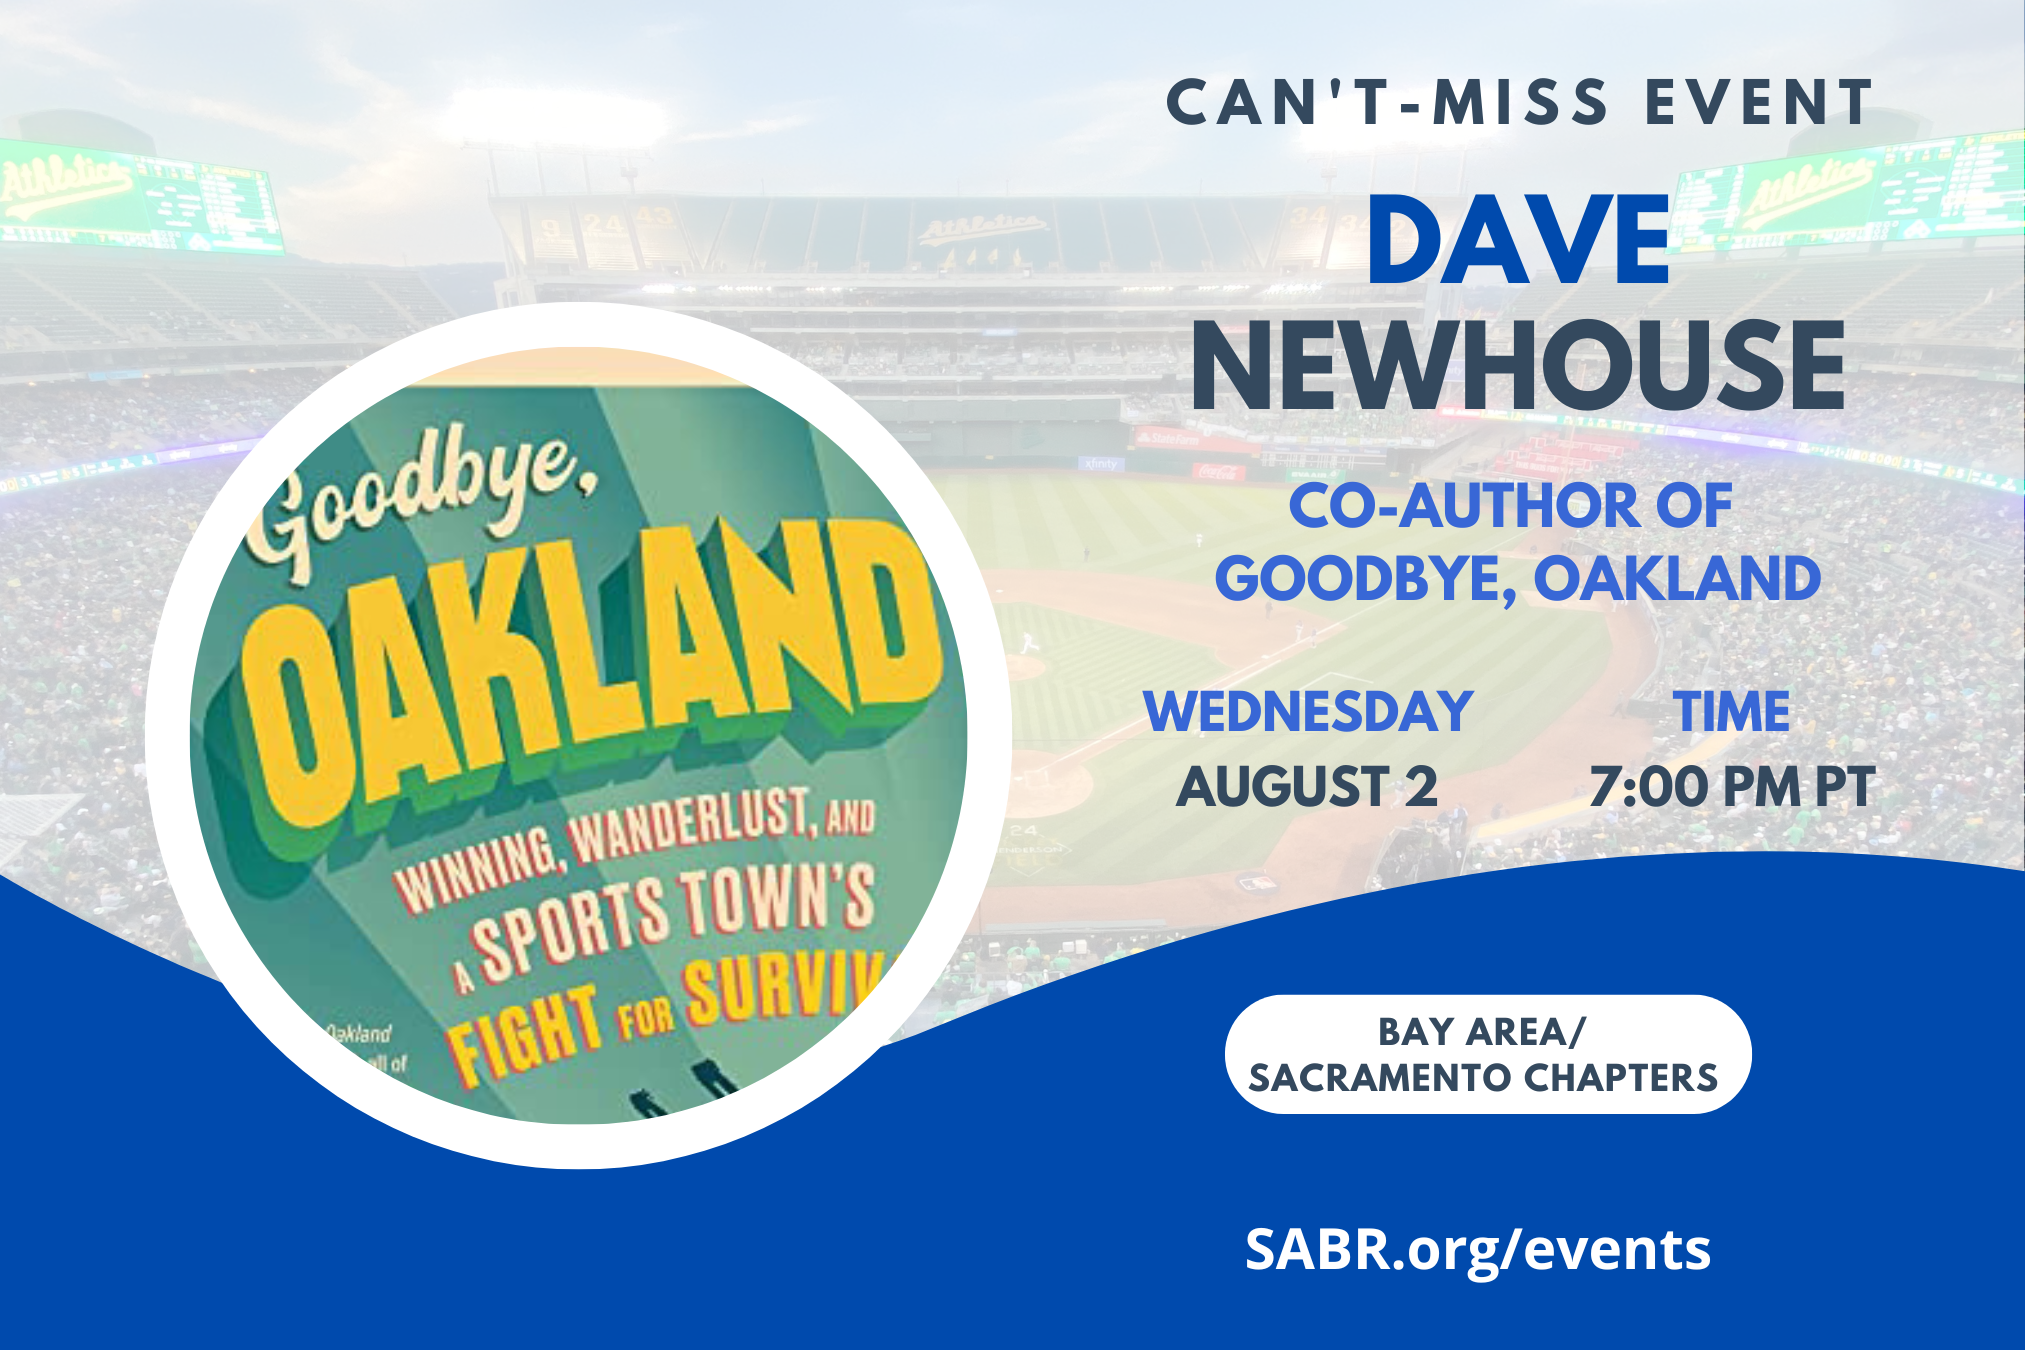 The Dusty Baker-Sacramento and Lefty O’Doul-Bay Area SABR chapters are excited to hold a special meeting on Wednesday, August 2, at 7 p.m. PDT! All baseball fans are invited to attend. Dave Newhouse will be talking about his new book, Goodbye Oakland: Winning, Wanderlust and a Sports Town's Fight for Survival. We are hoping co-author Andy Dolich will also be joining us.